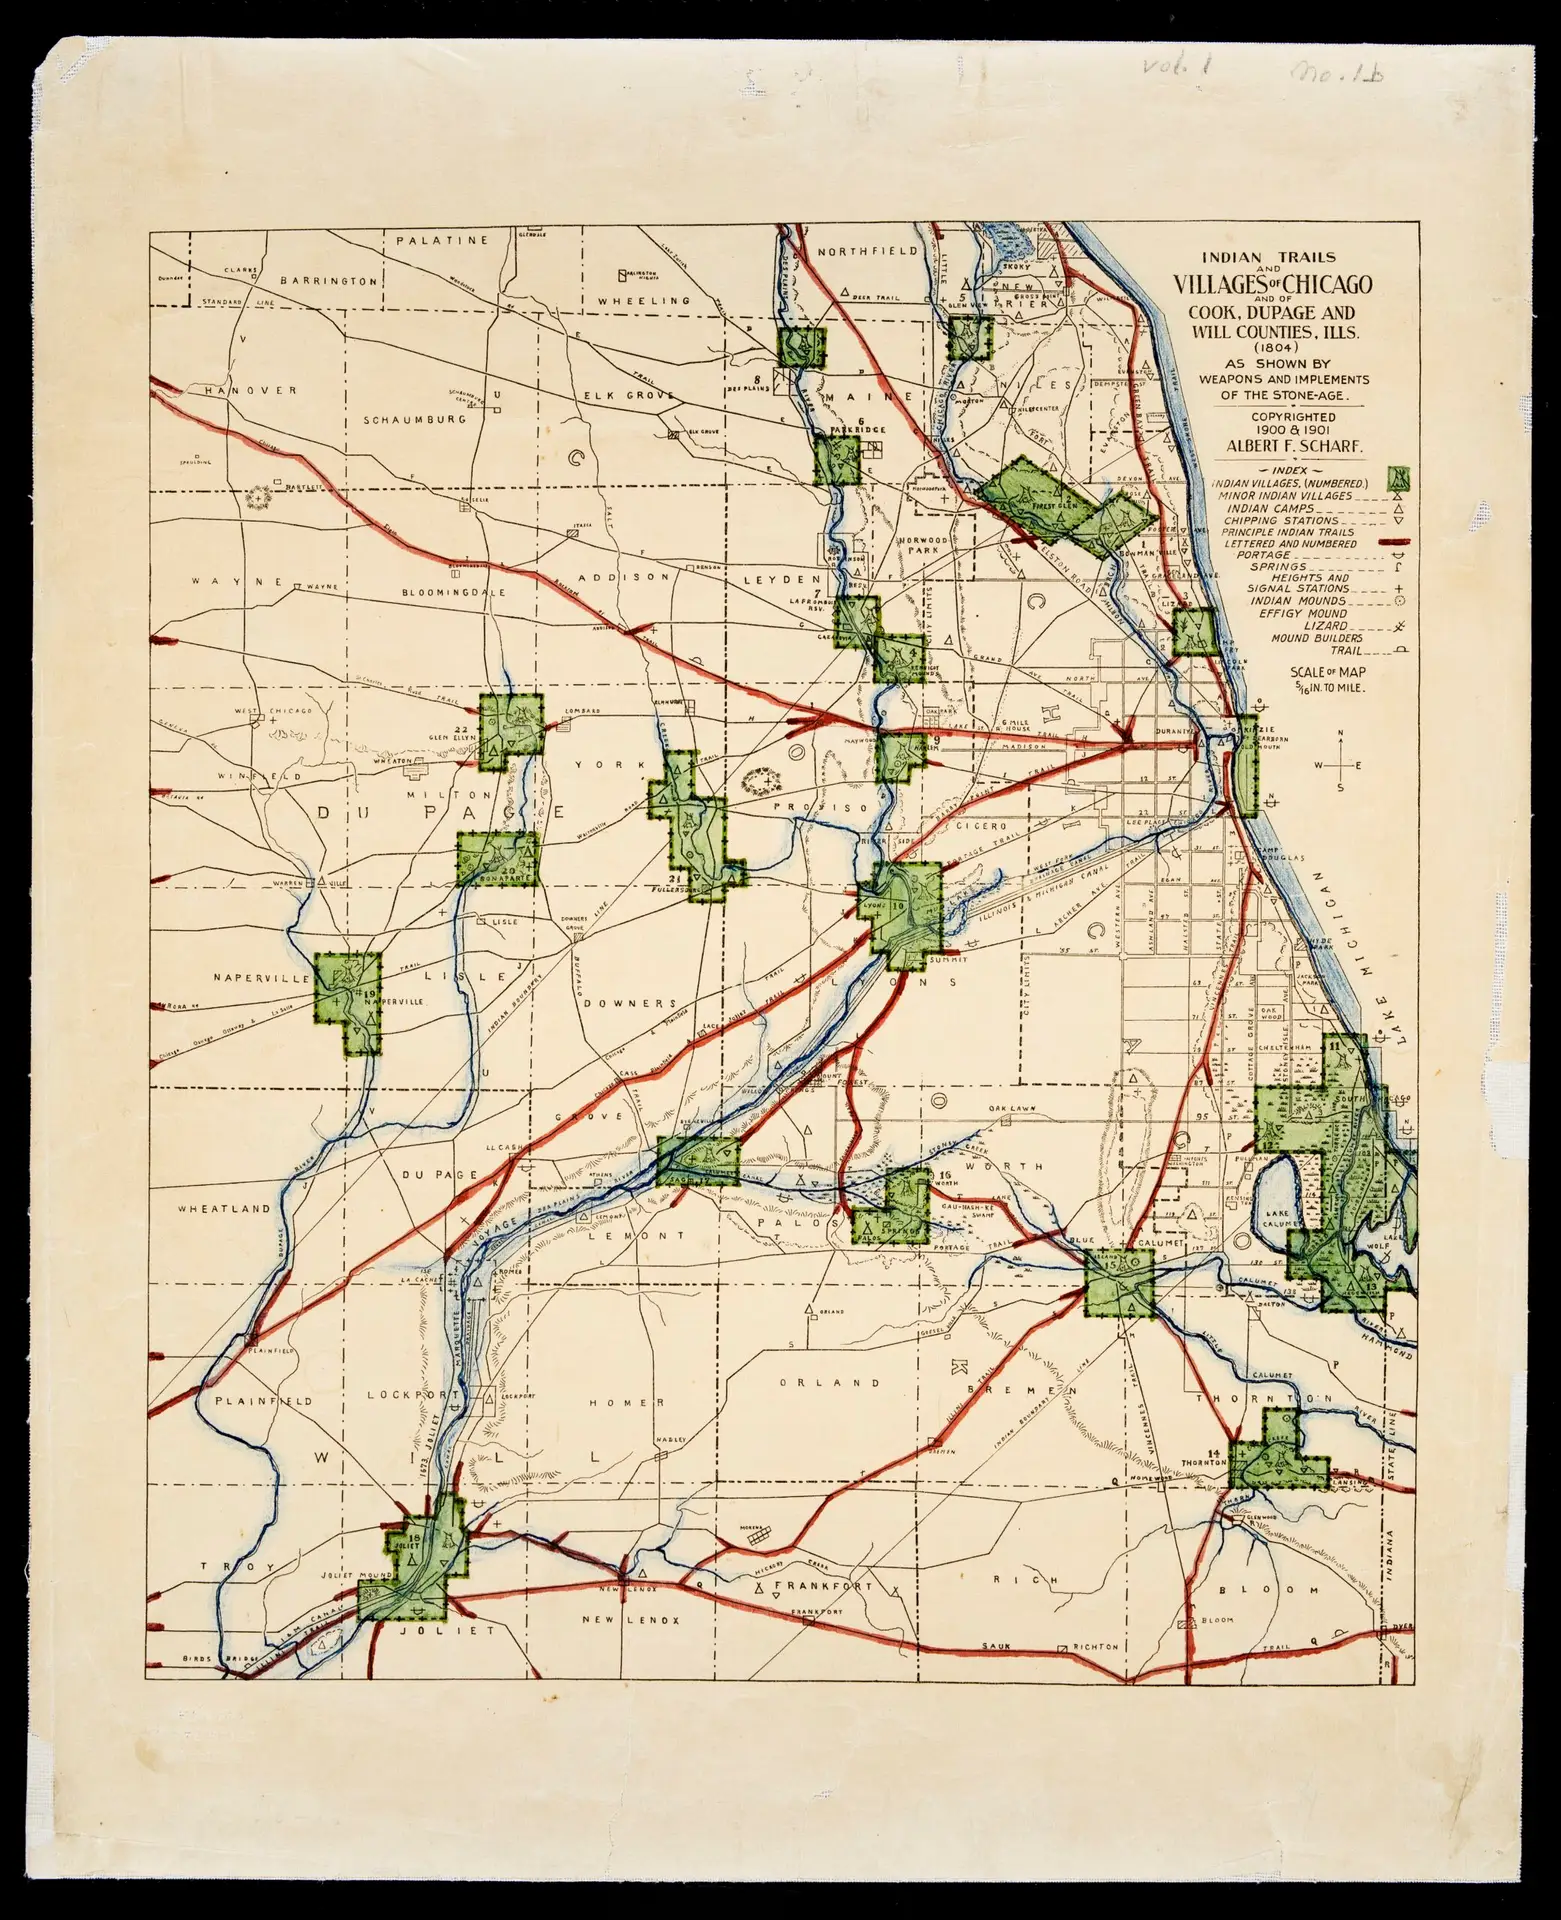 A map of the Chicago area with villages highlighted in green, principle trails in red, and waterways in blue.